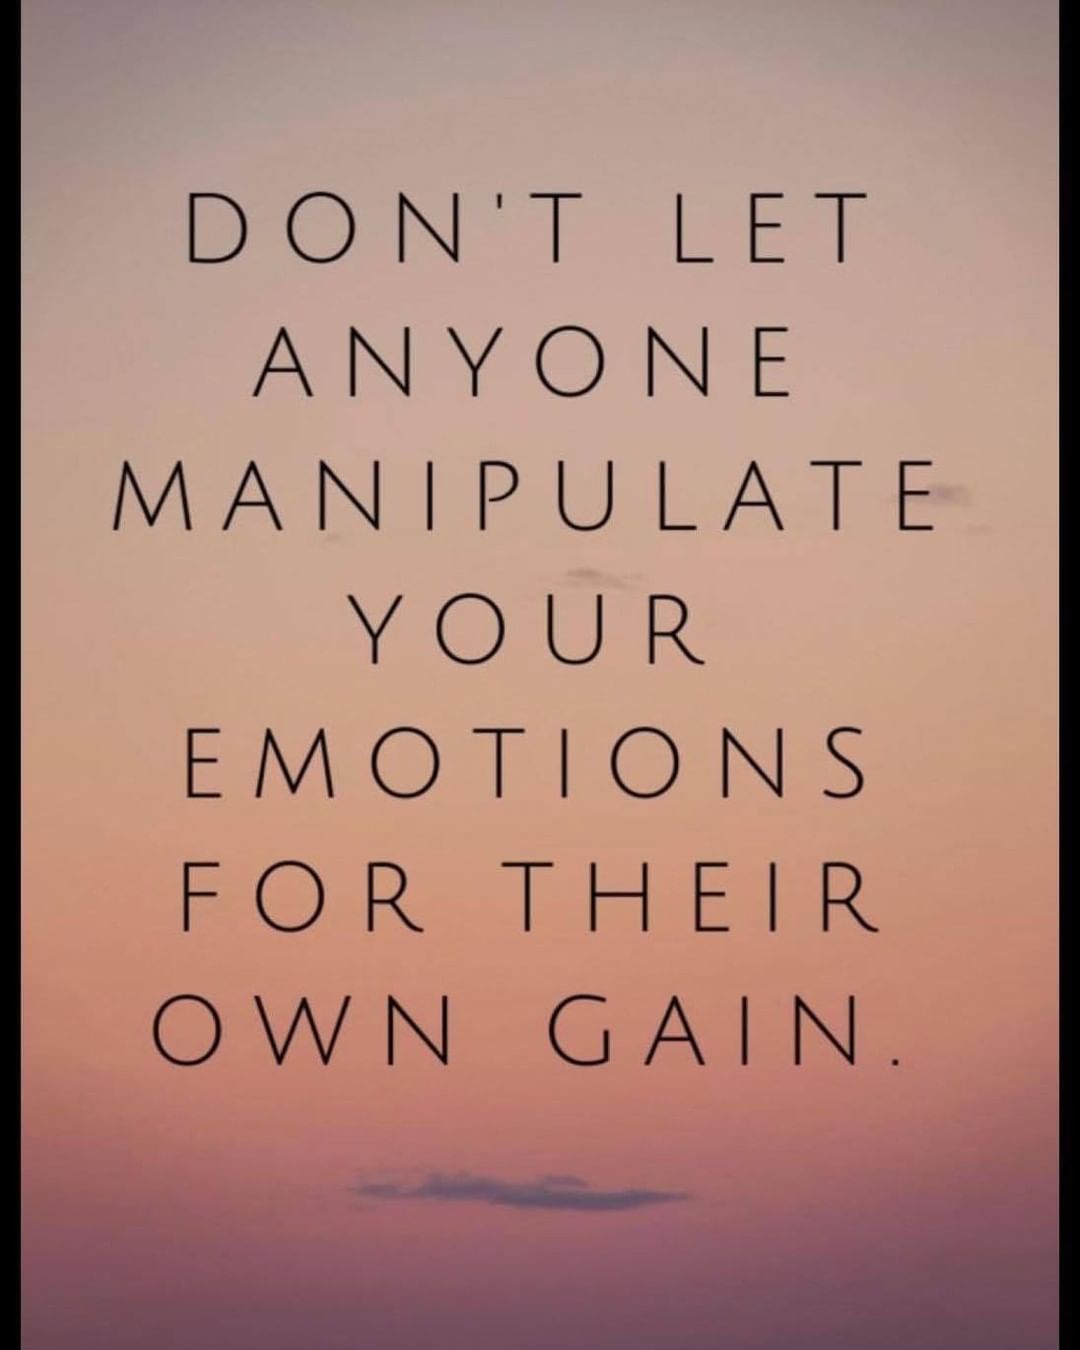 Don't let manipulate your emotions for their own gain.